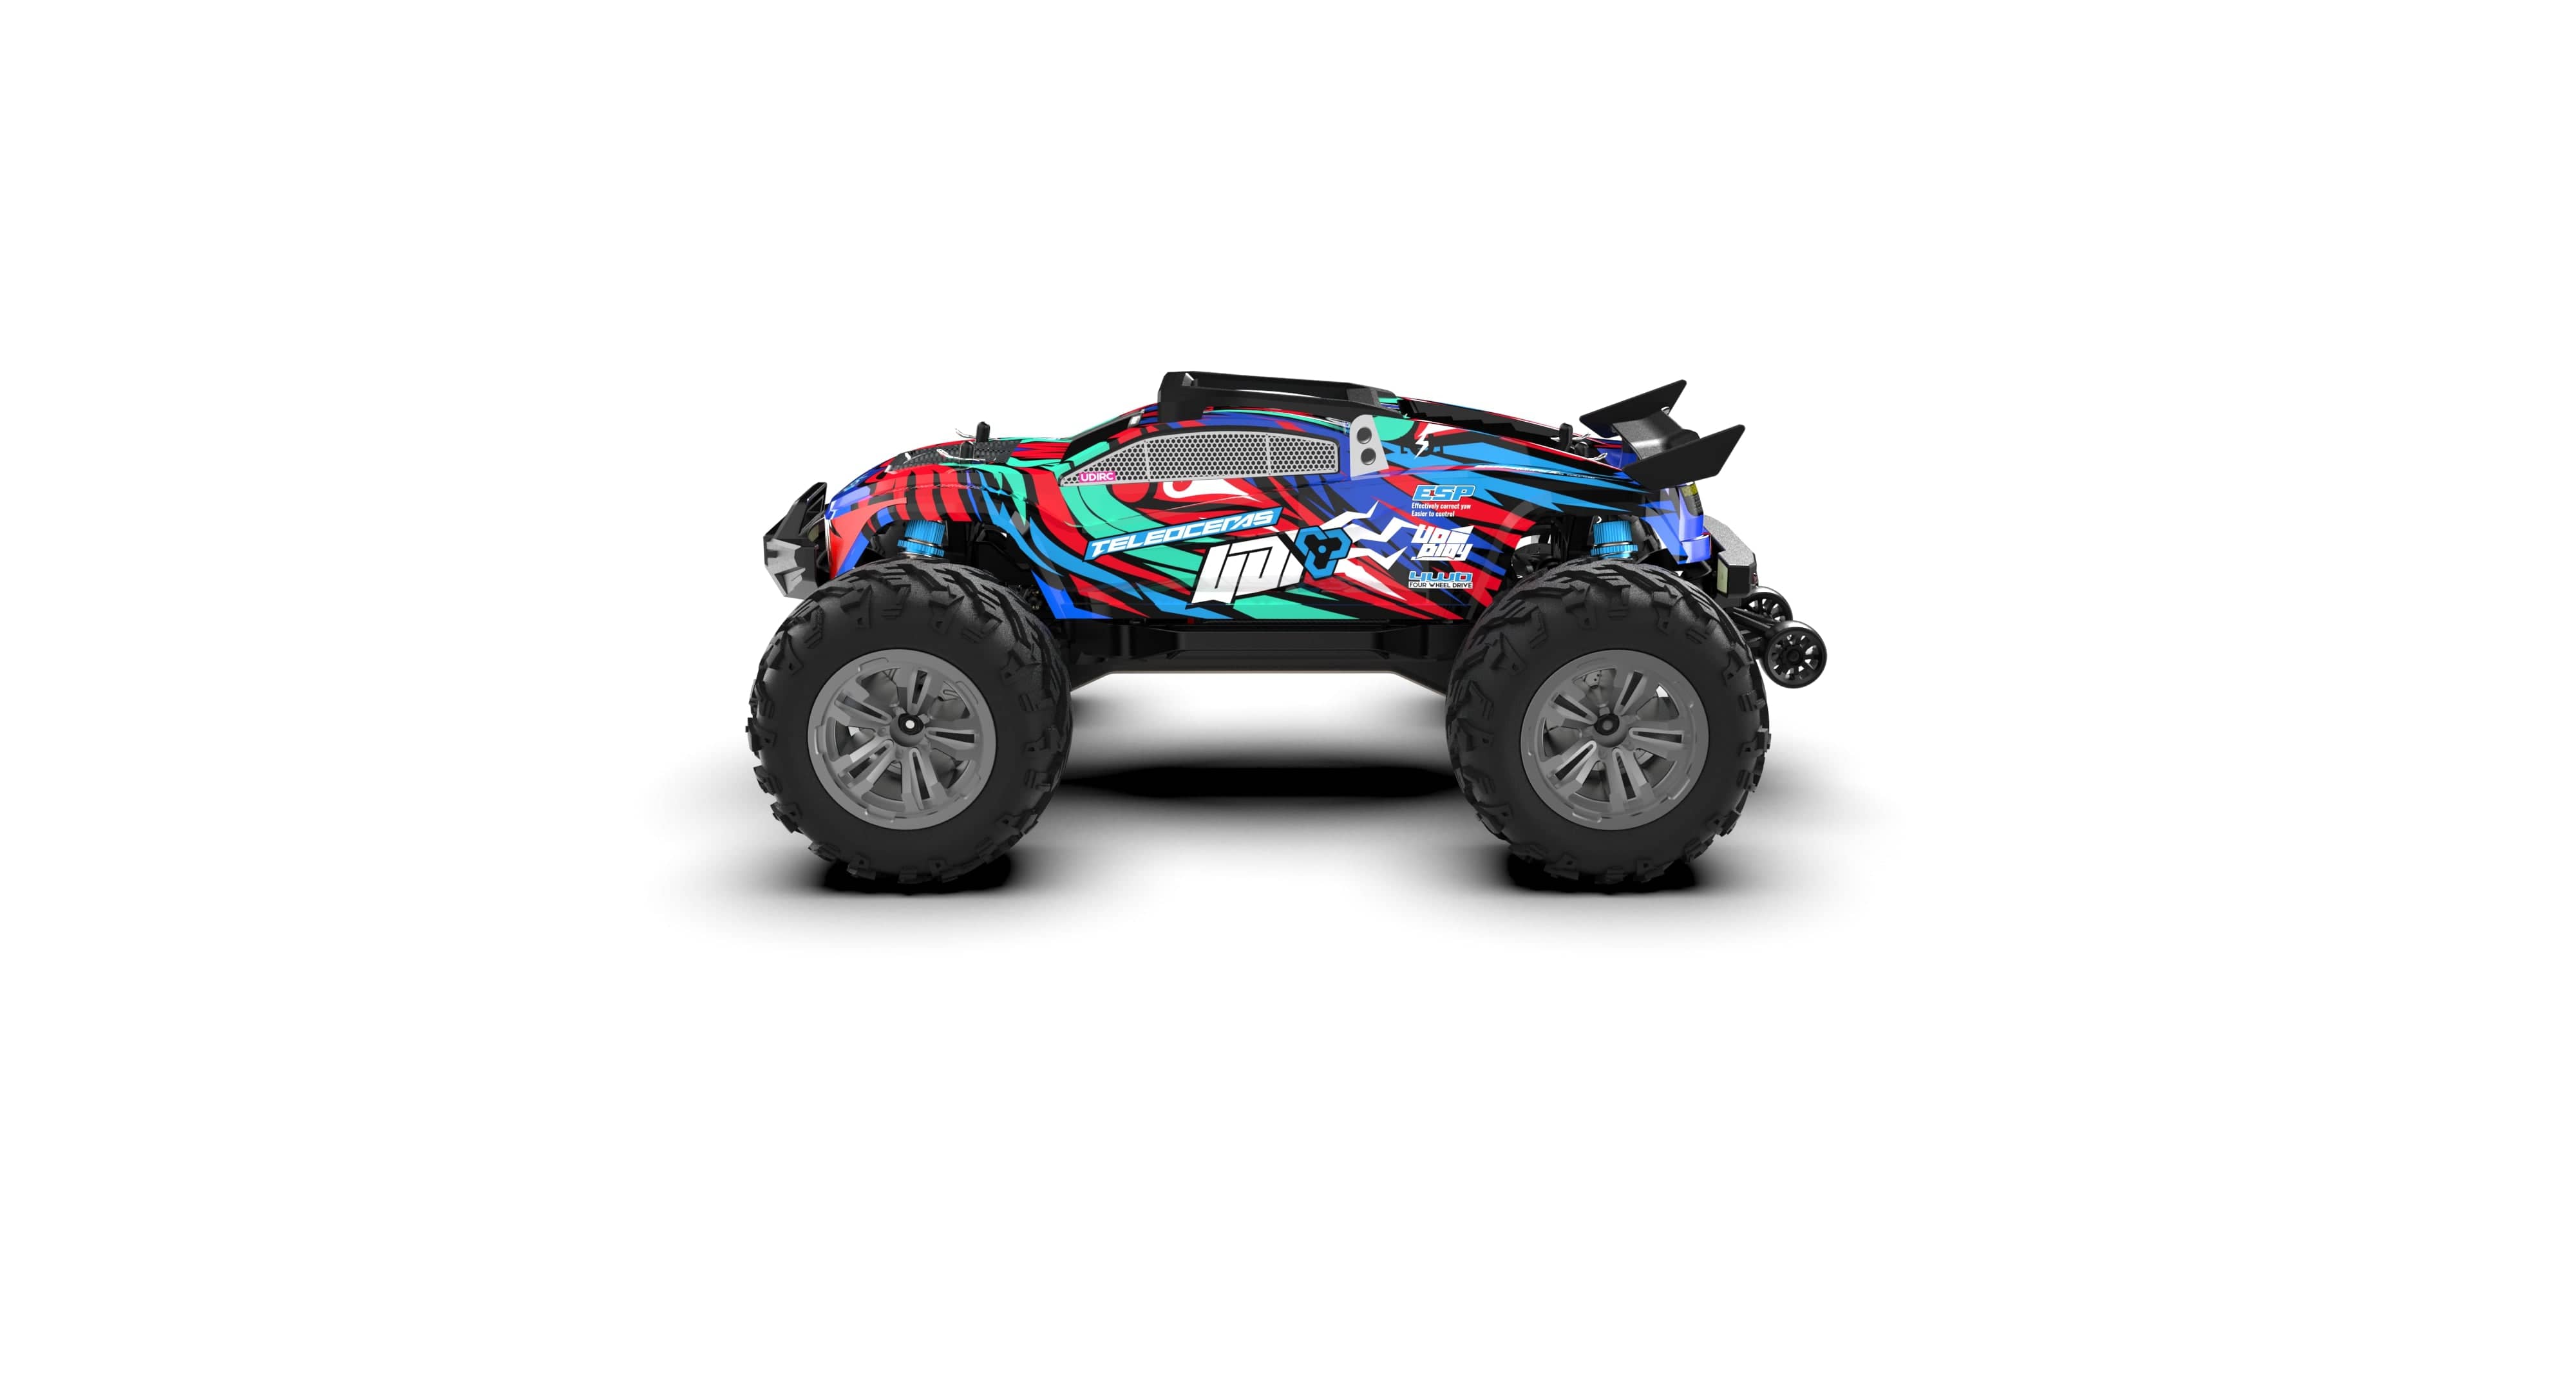 HOSIM 1202 1:12 Large Scale Remote Control Car RC Car Monster Truck 4X4 OFFROAD Truck 40KM/h High Speed